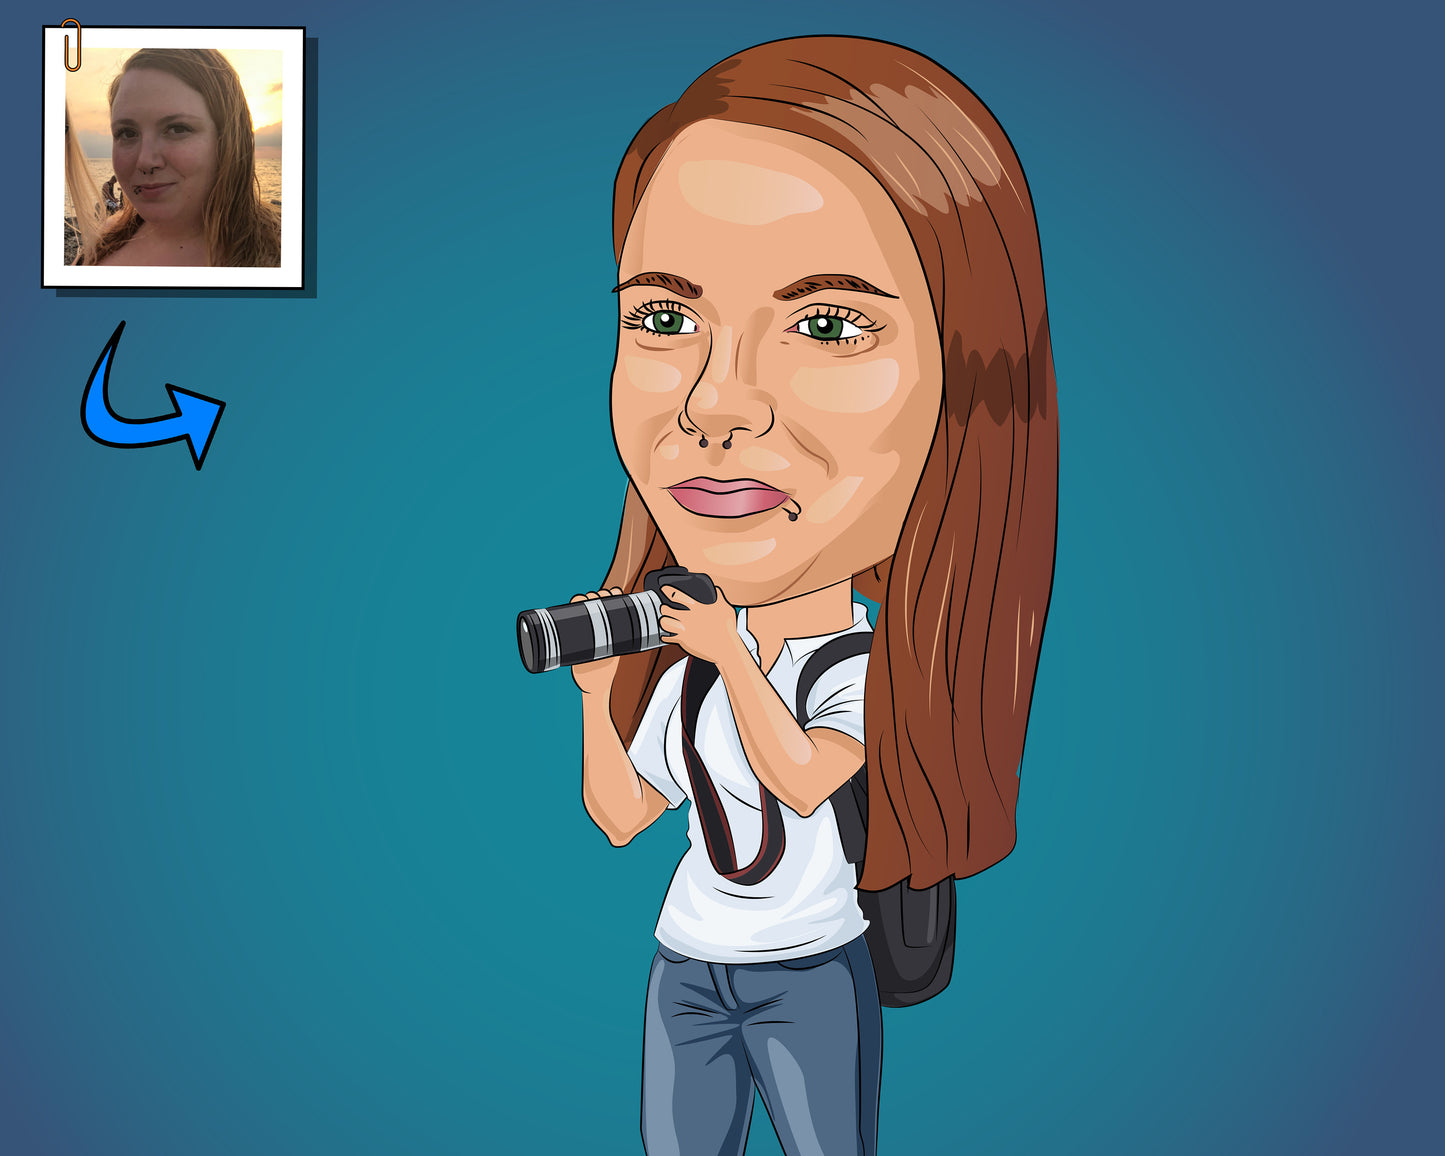 Photographer Gift - Custom Caricature Portrait From Your Photo